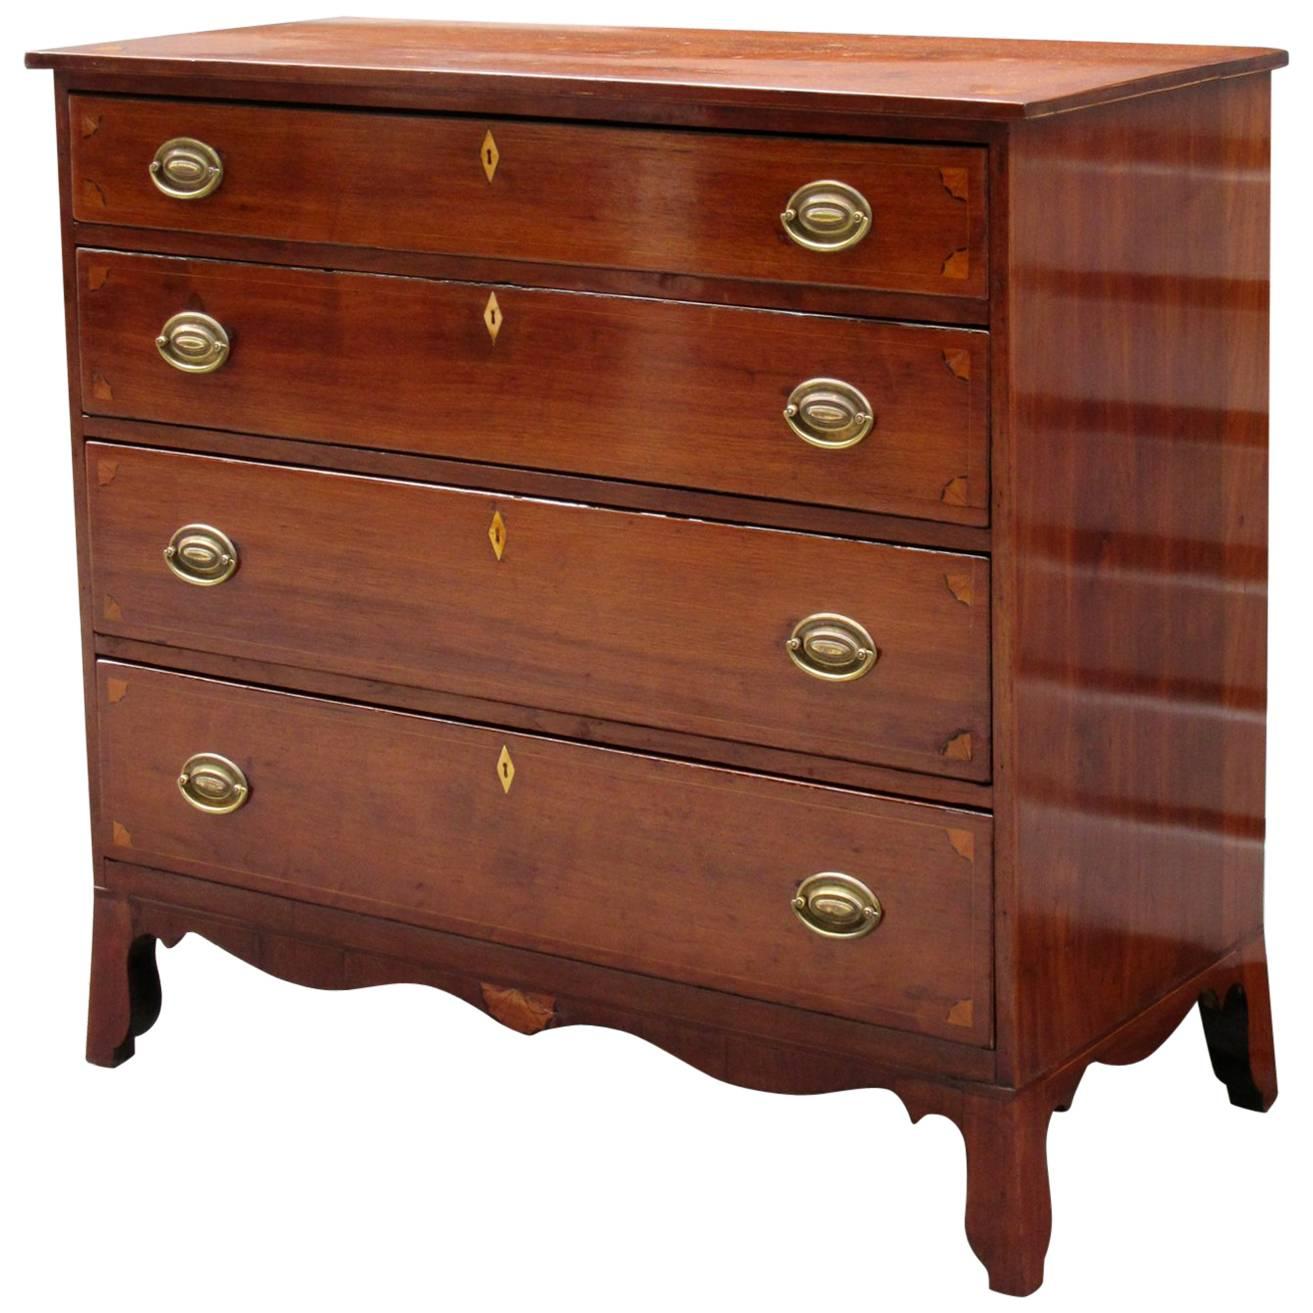 Early 19th Century Virginia Federal Walnut Chest of Drawers with Compass Inlay